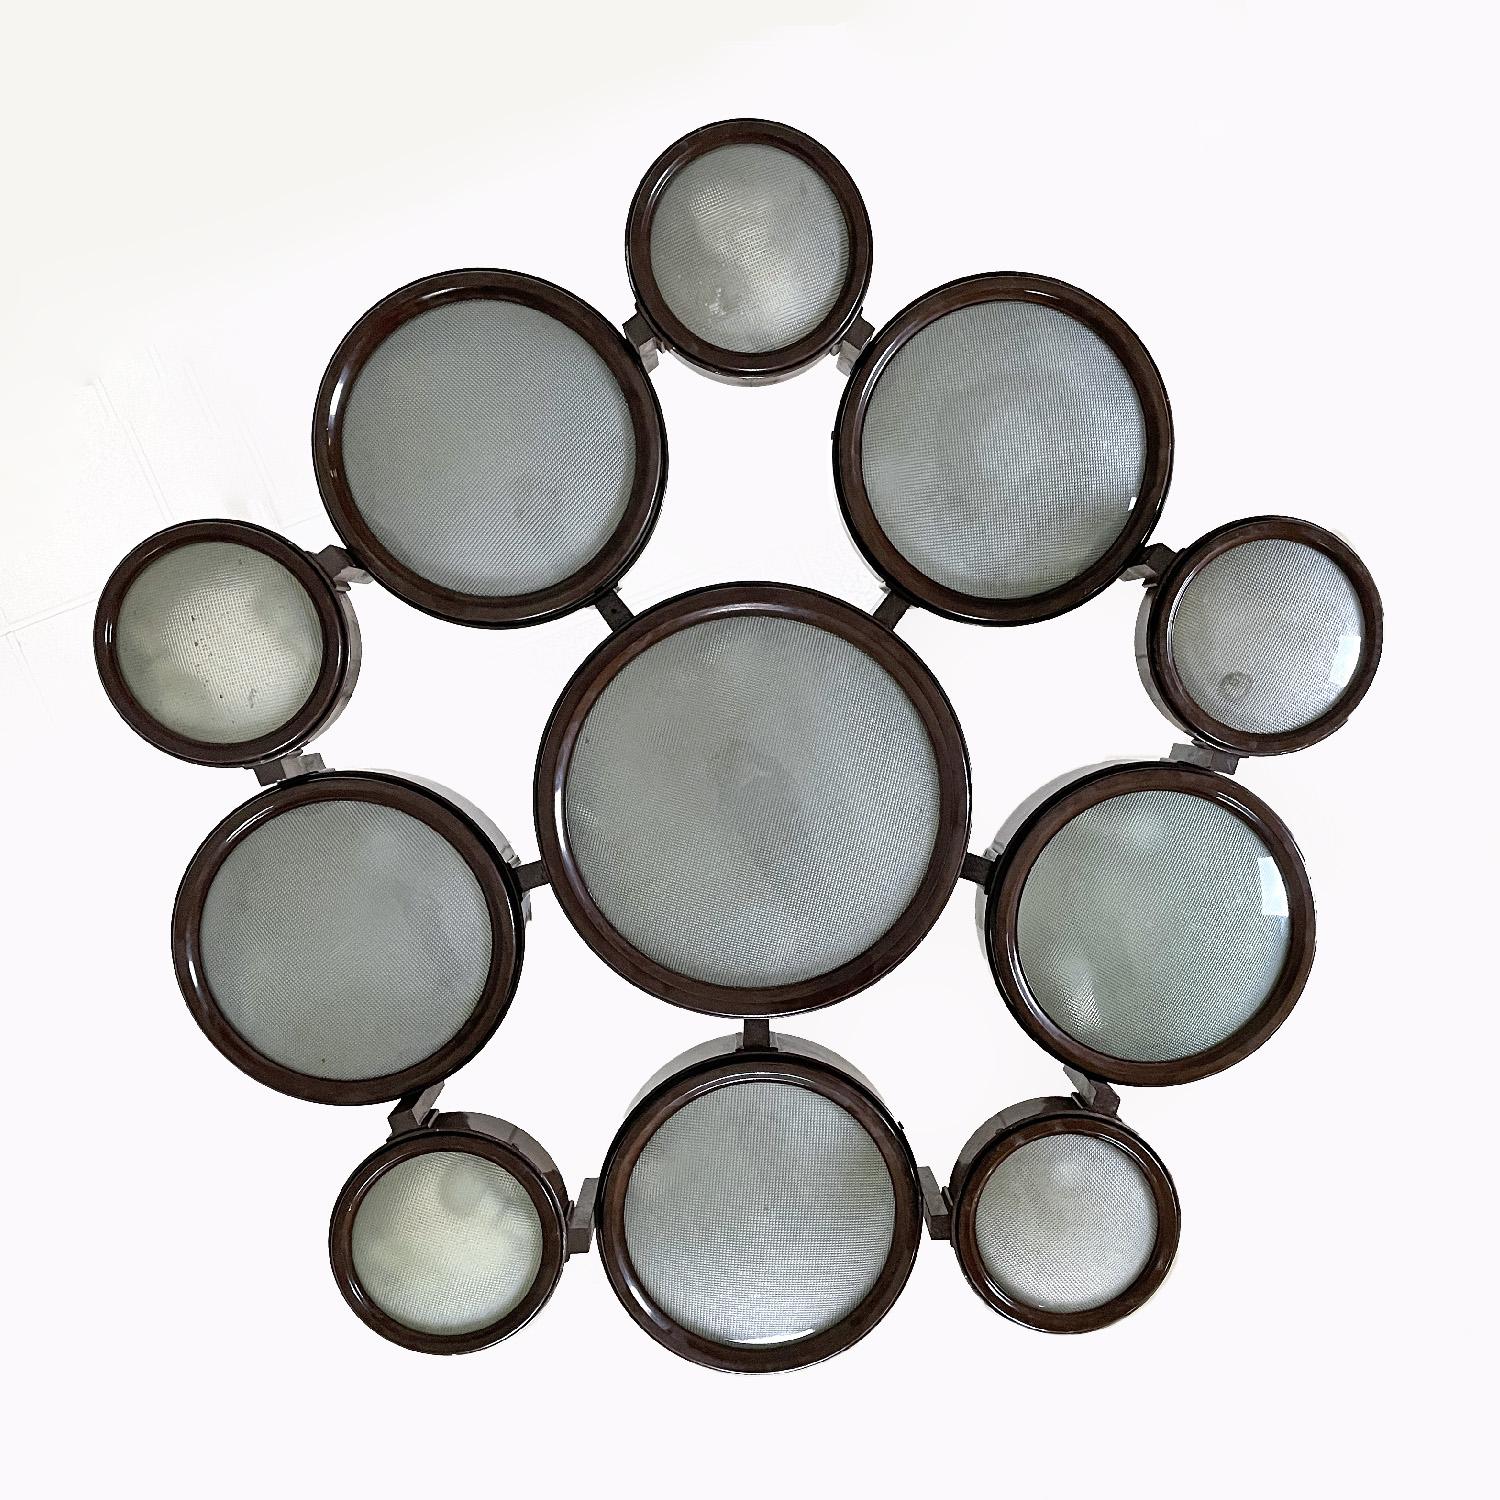 Italian mid-century modern brown ceiling lamp 2045 by BBPR for Arteluce, 1960s
Ceiling chandelier mod. 2045 pentagonal in shape. It has a total of eleven speakers, six of which are larger and five smaller, differing in both circumference and height.